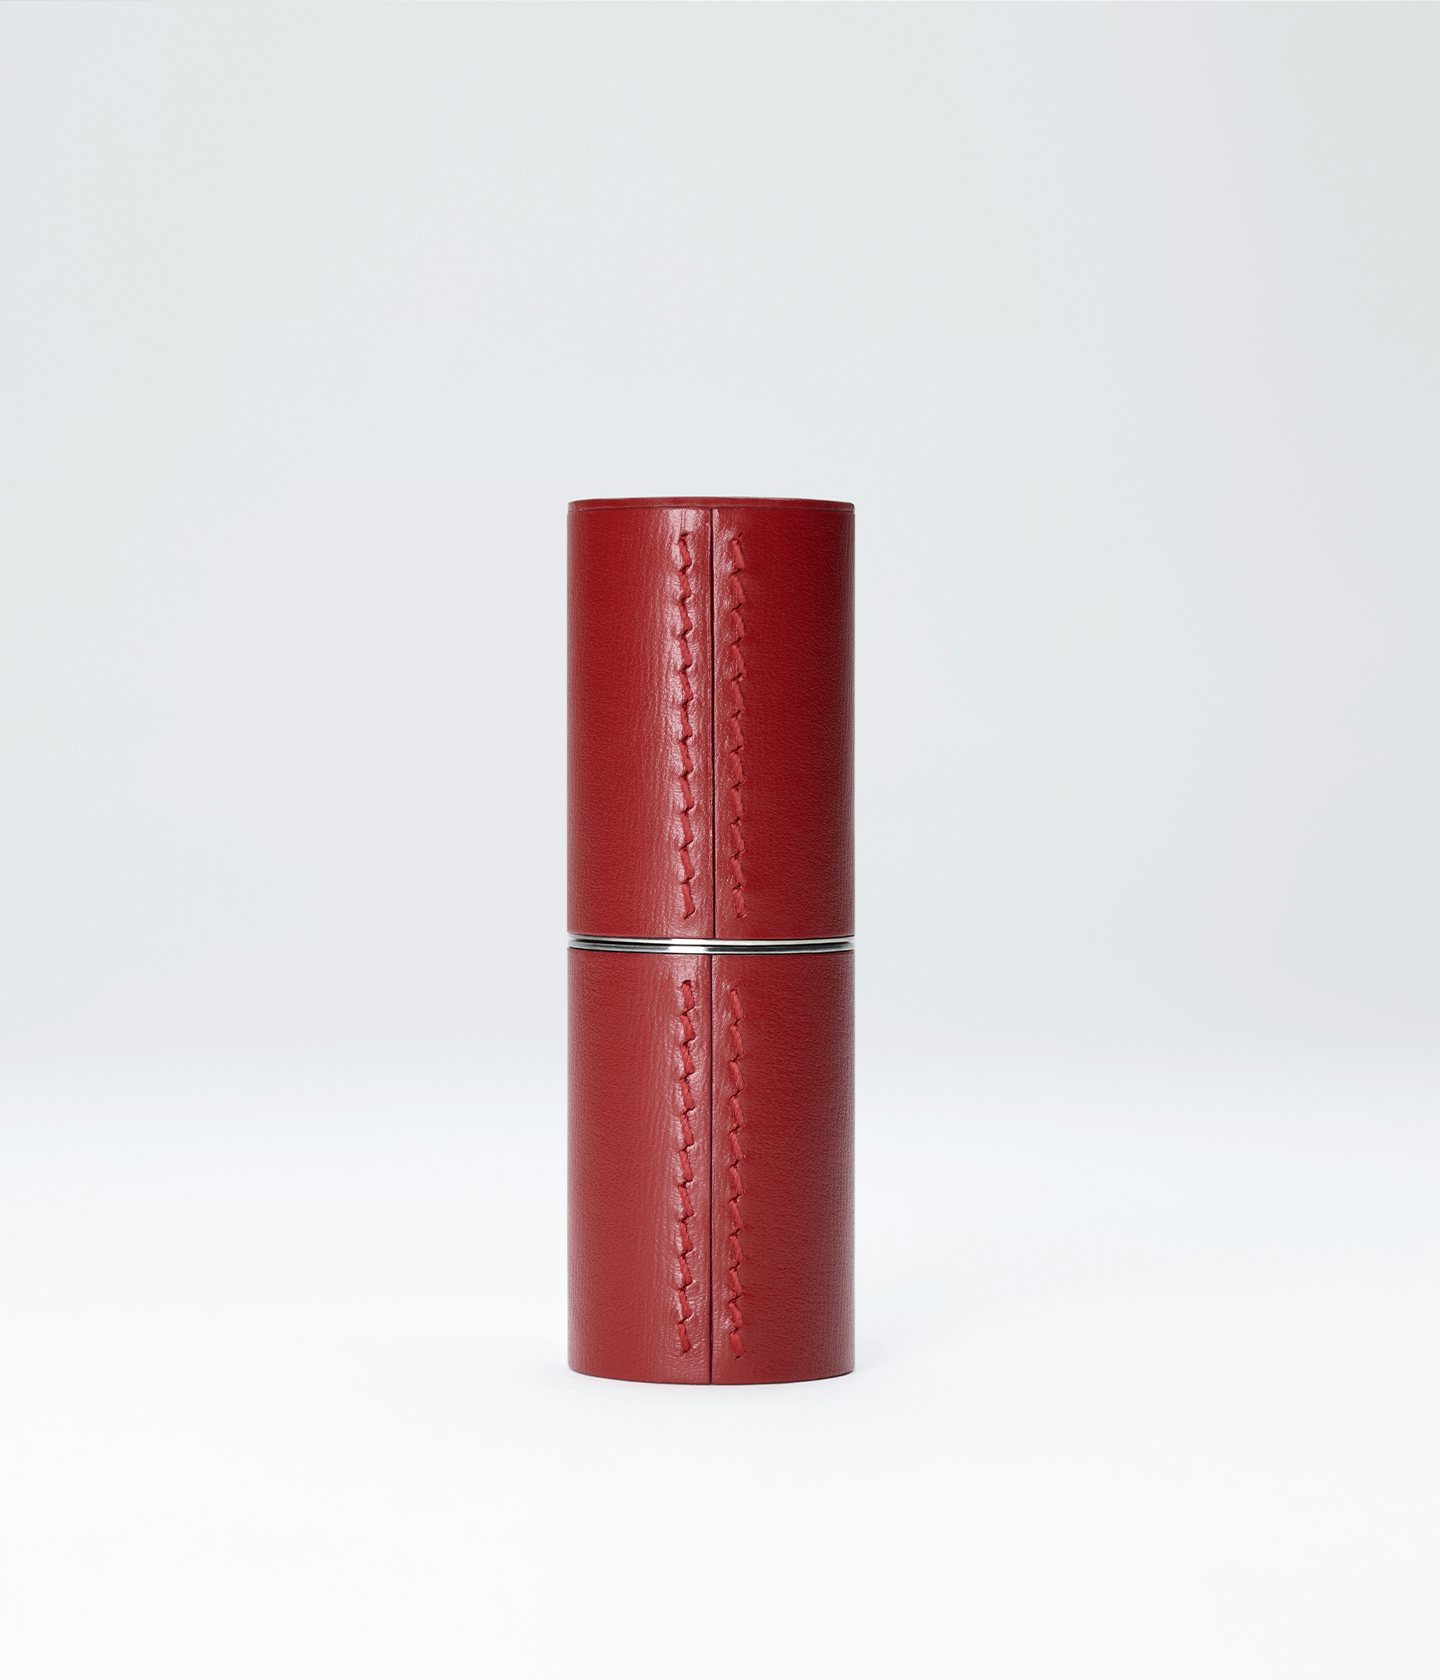 La bouche rouge The Iconic Nude Red in the red leather case